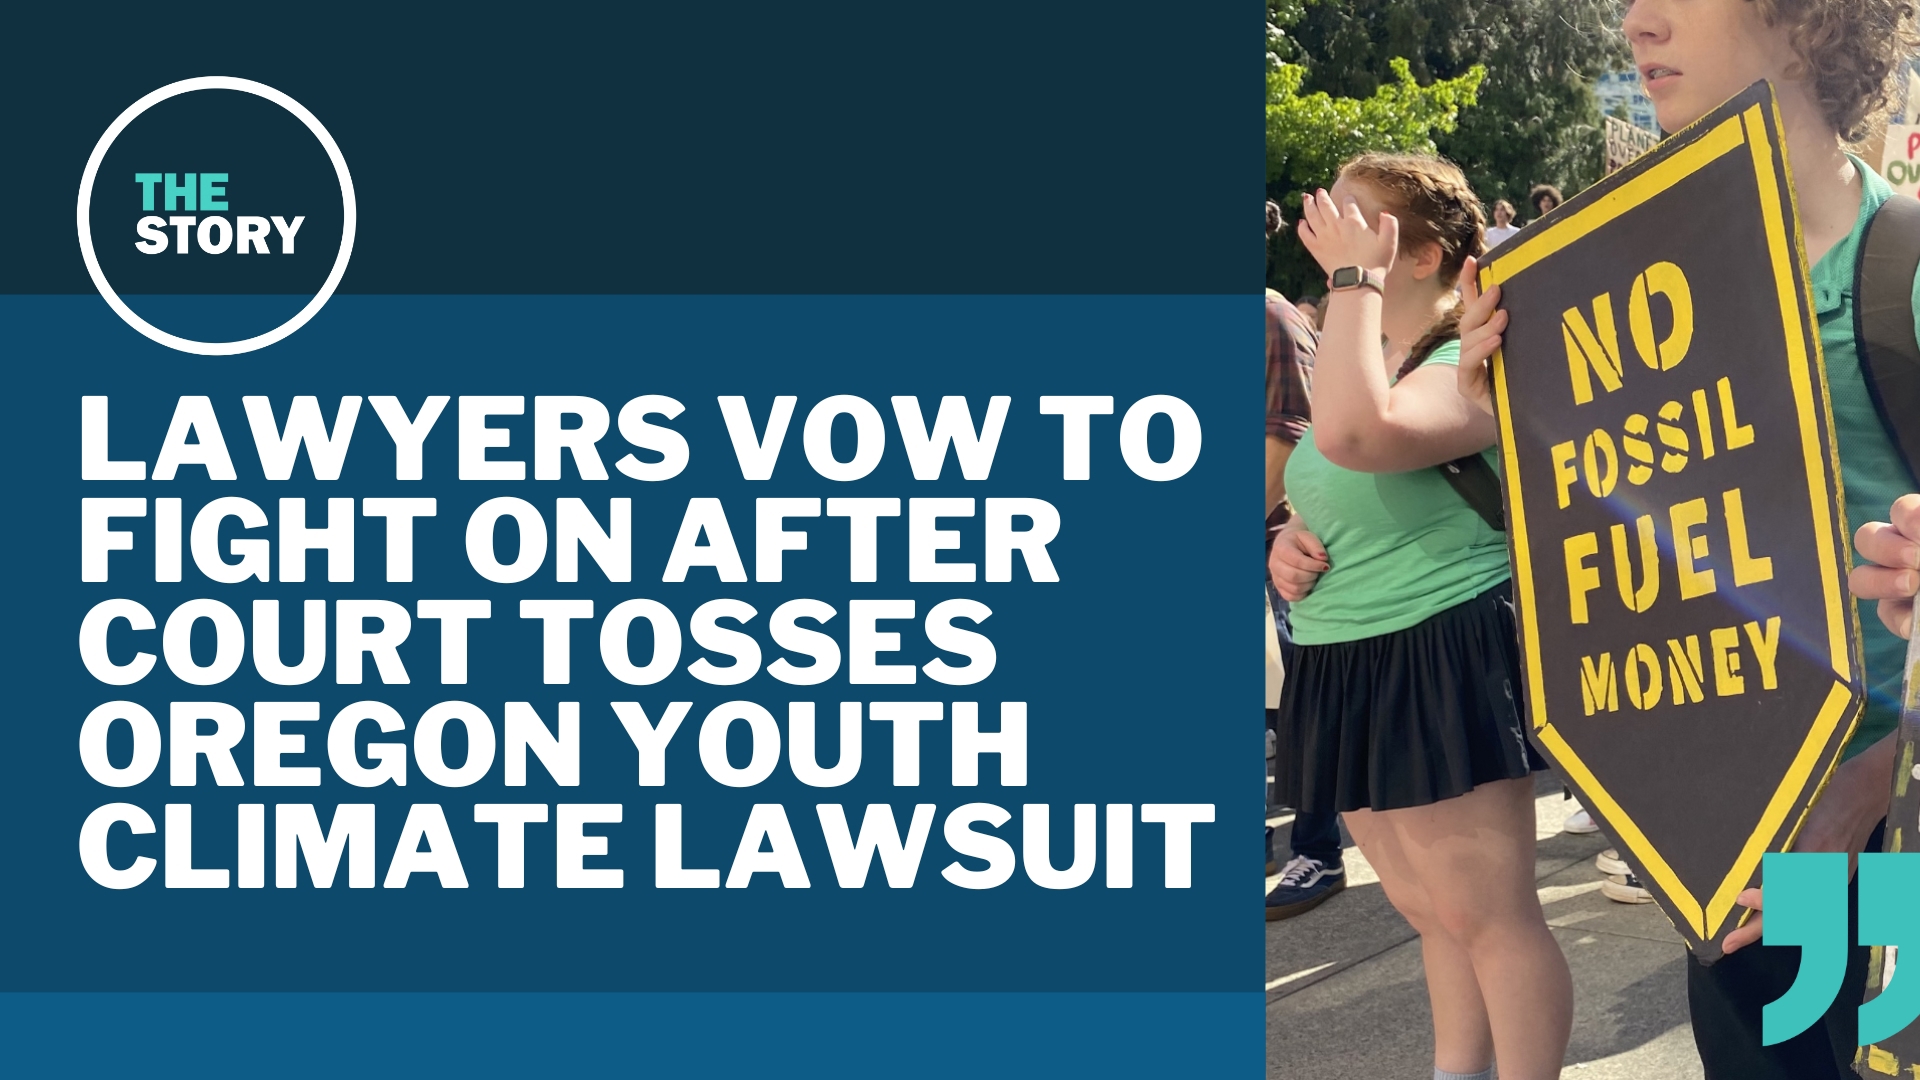 The lawsuit, which was filed by 21 young people in 2015, was ordered dismissed by a three-judge panel last week.